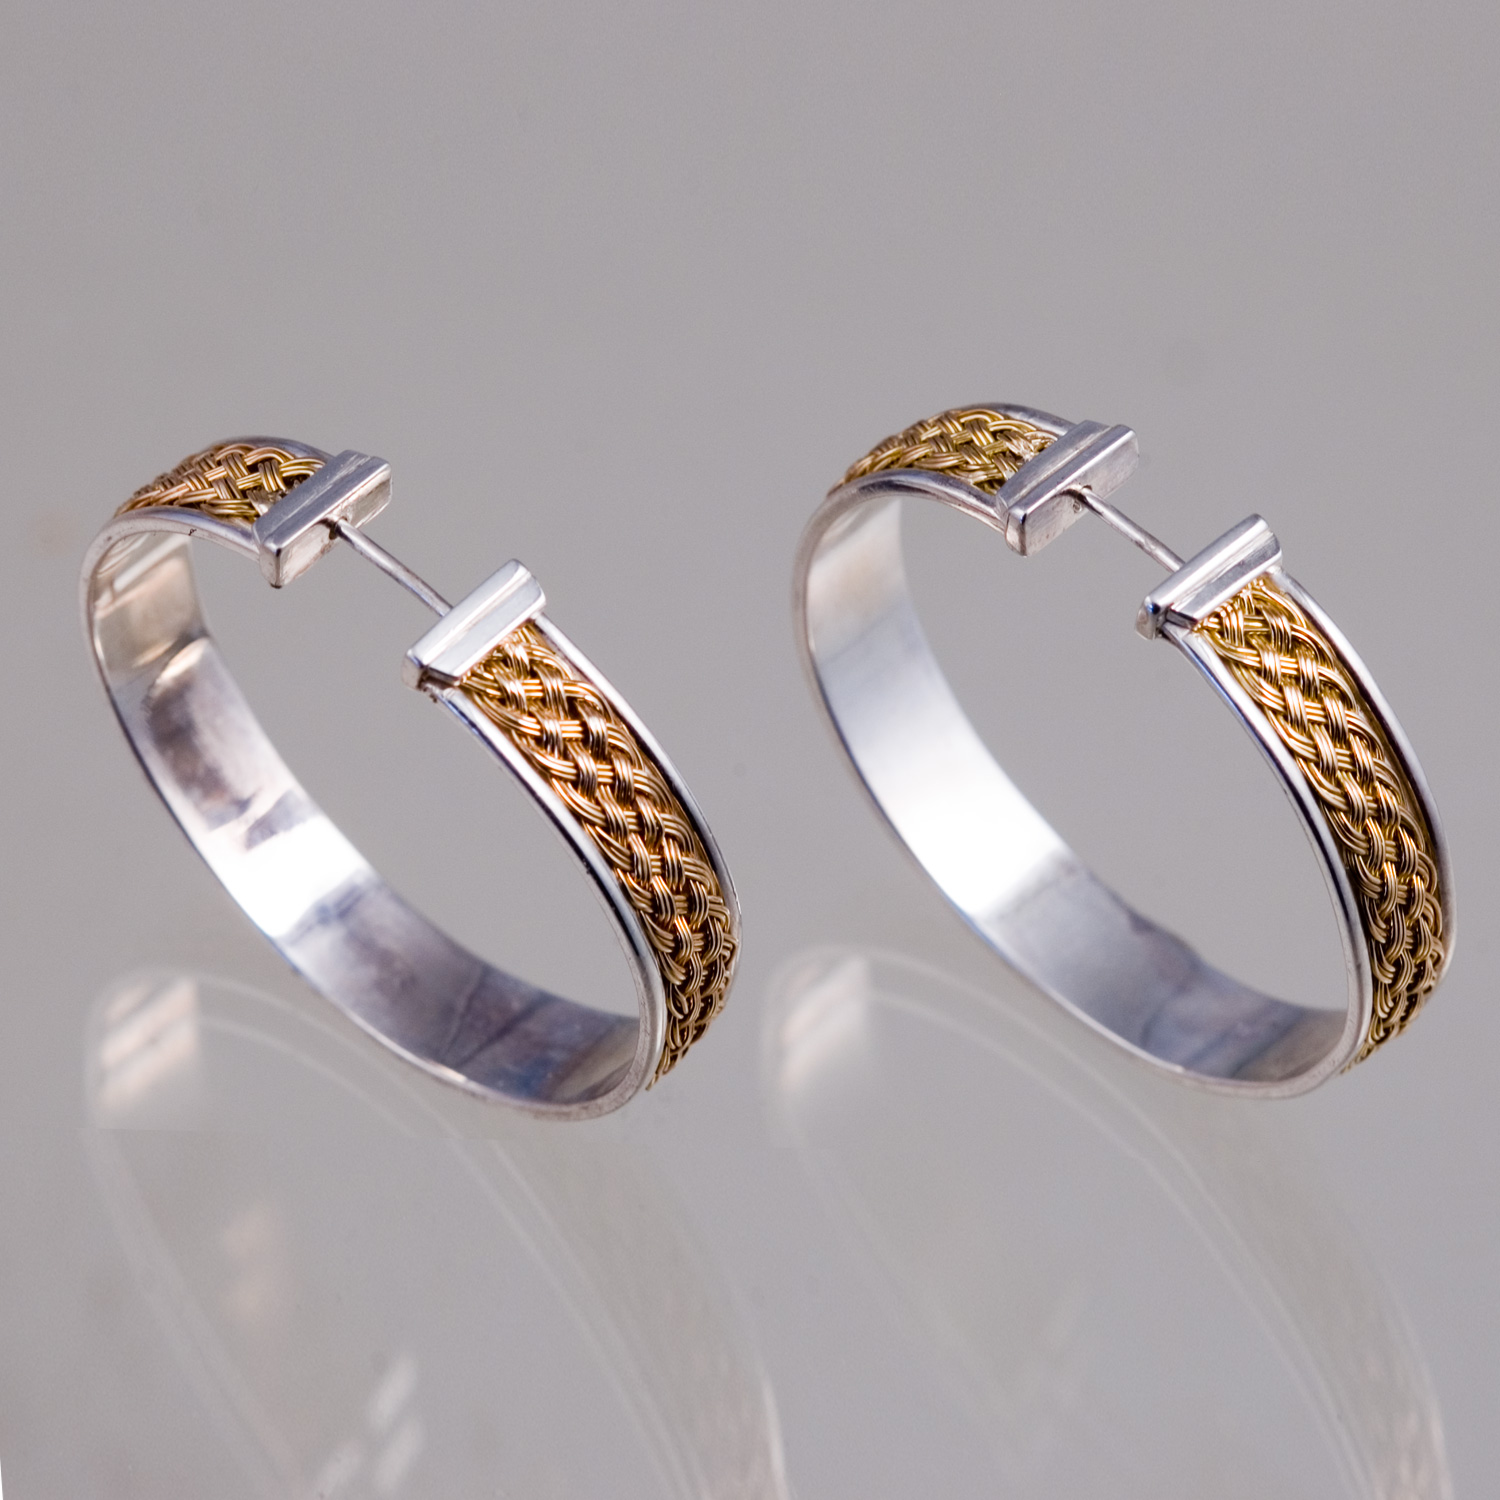 Inset Weave Hoops in 18k gold & sterling silver hand woven by Tamberlaine